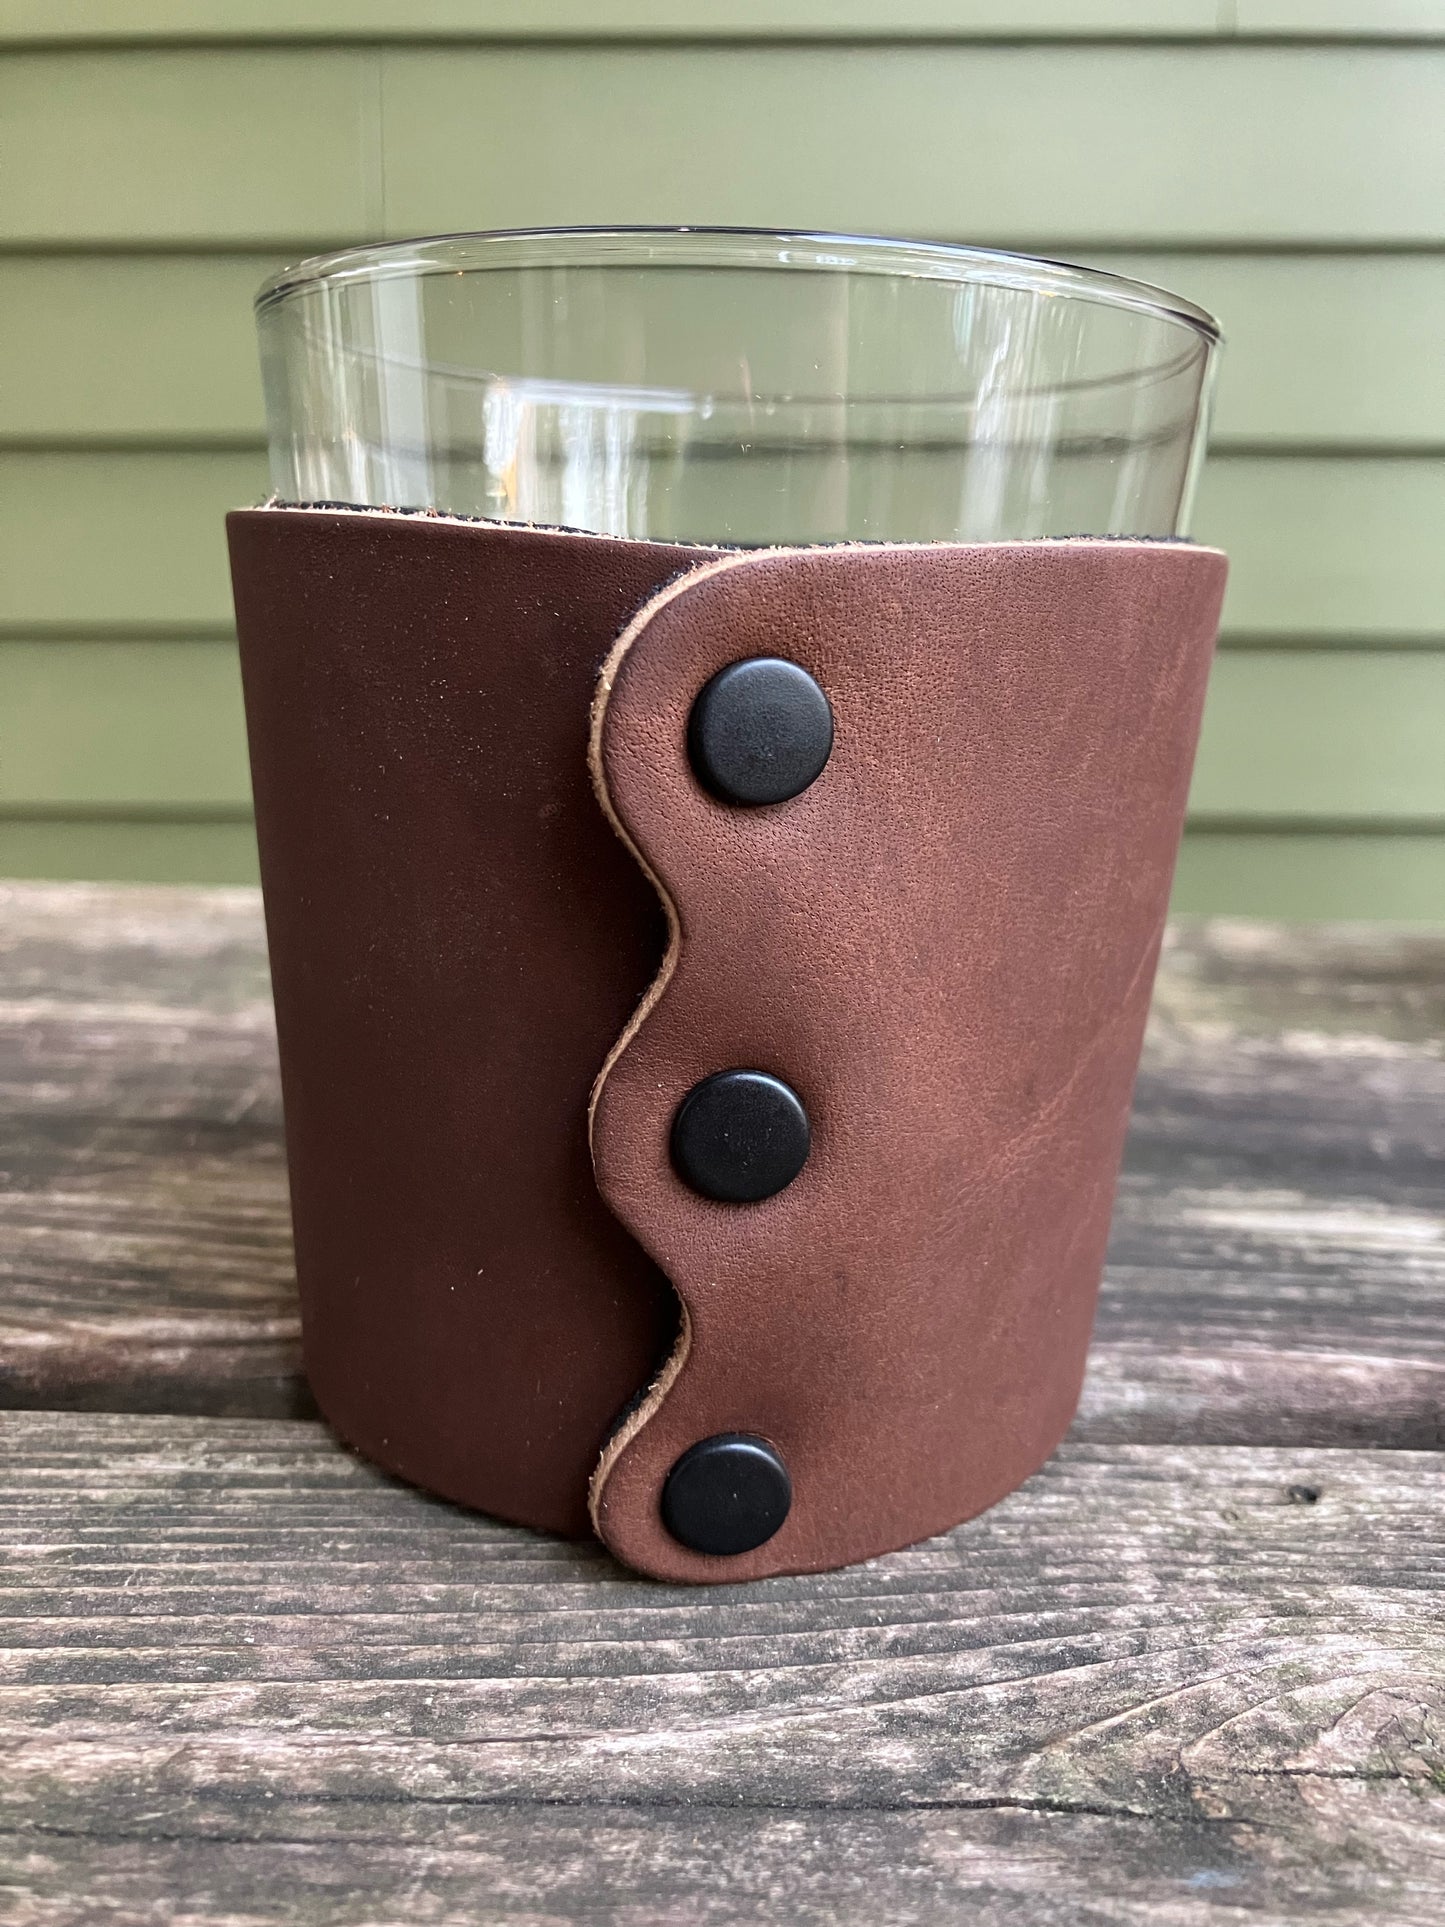 Leather Wrapped Whiskey Glass - Cocktails